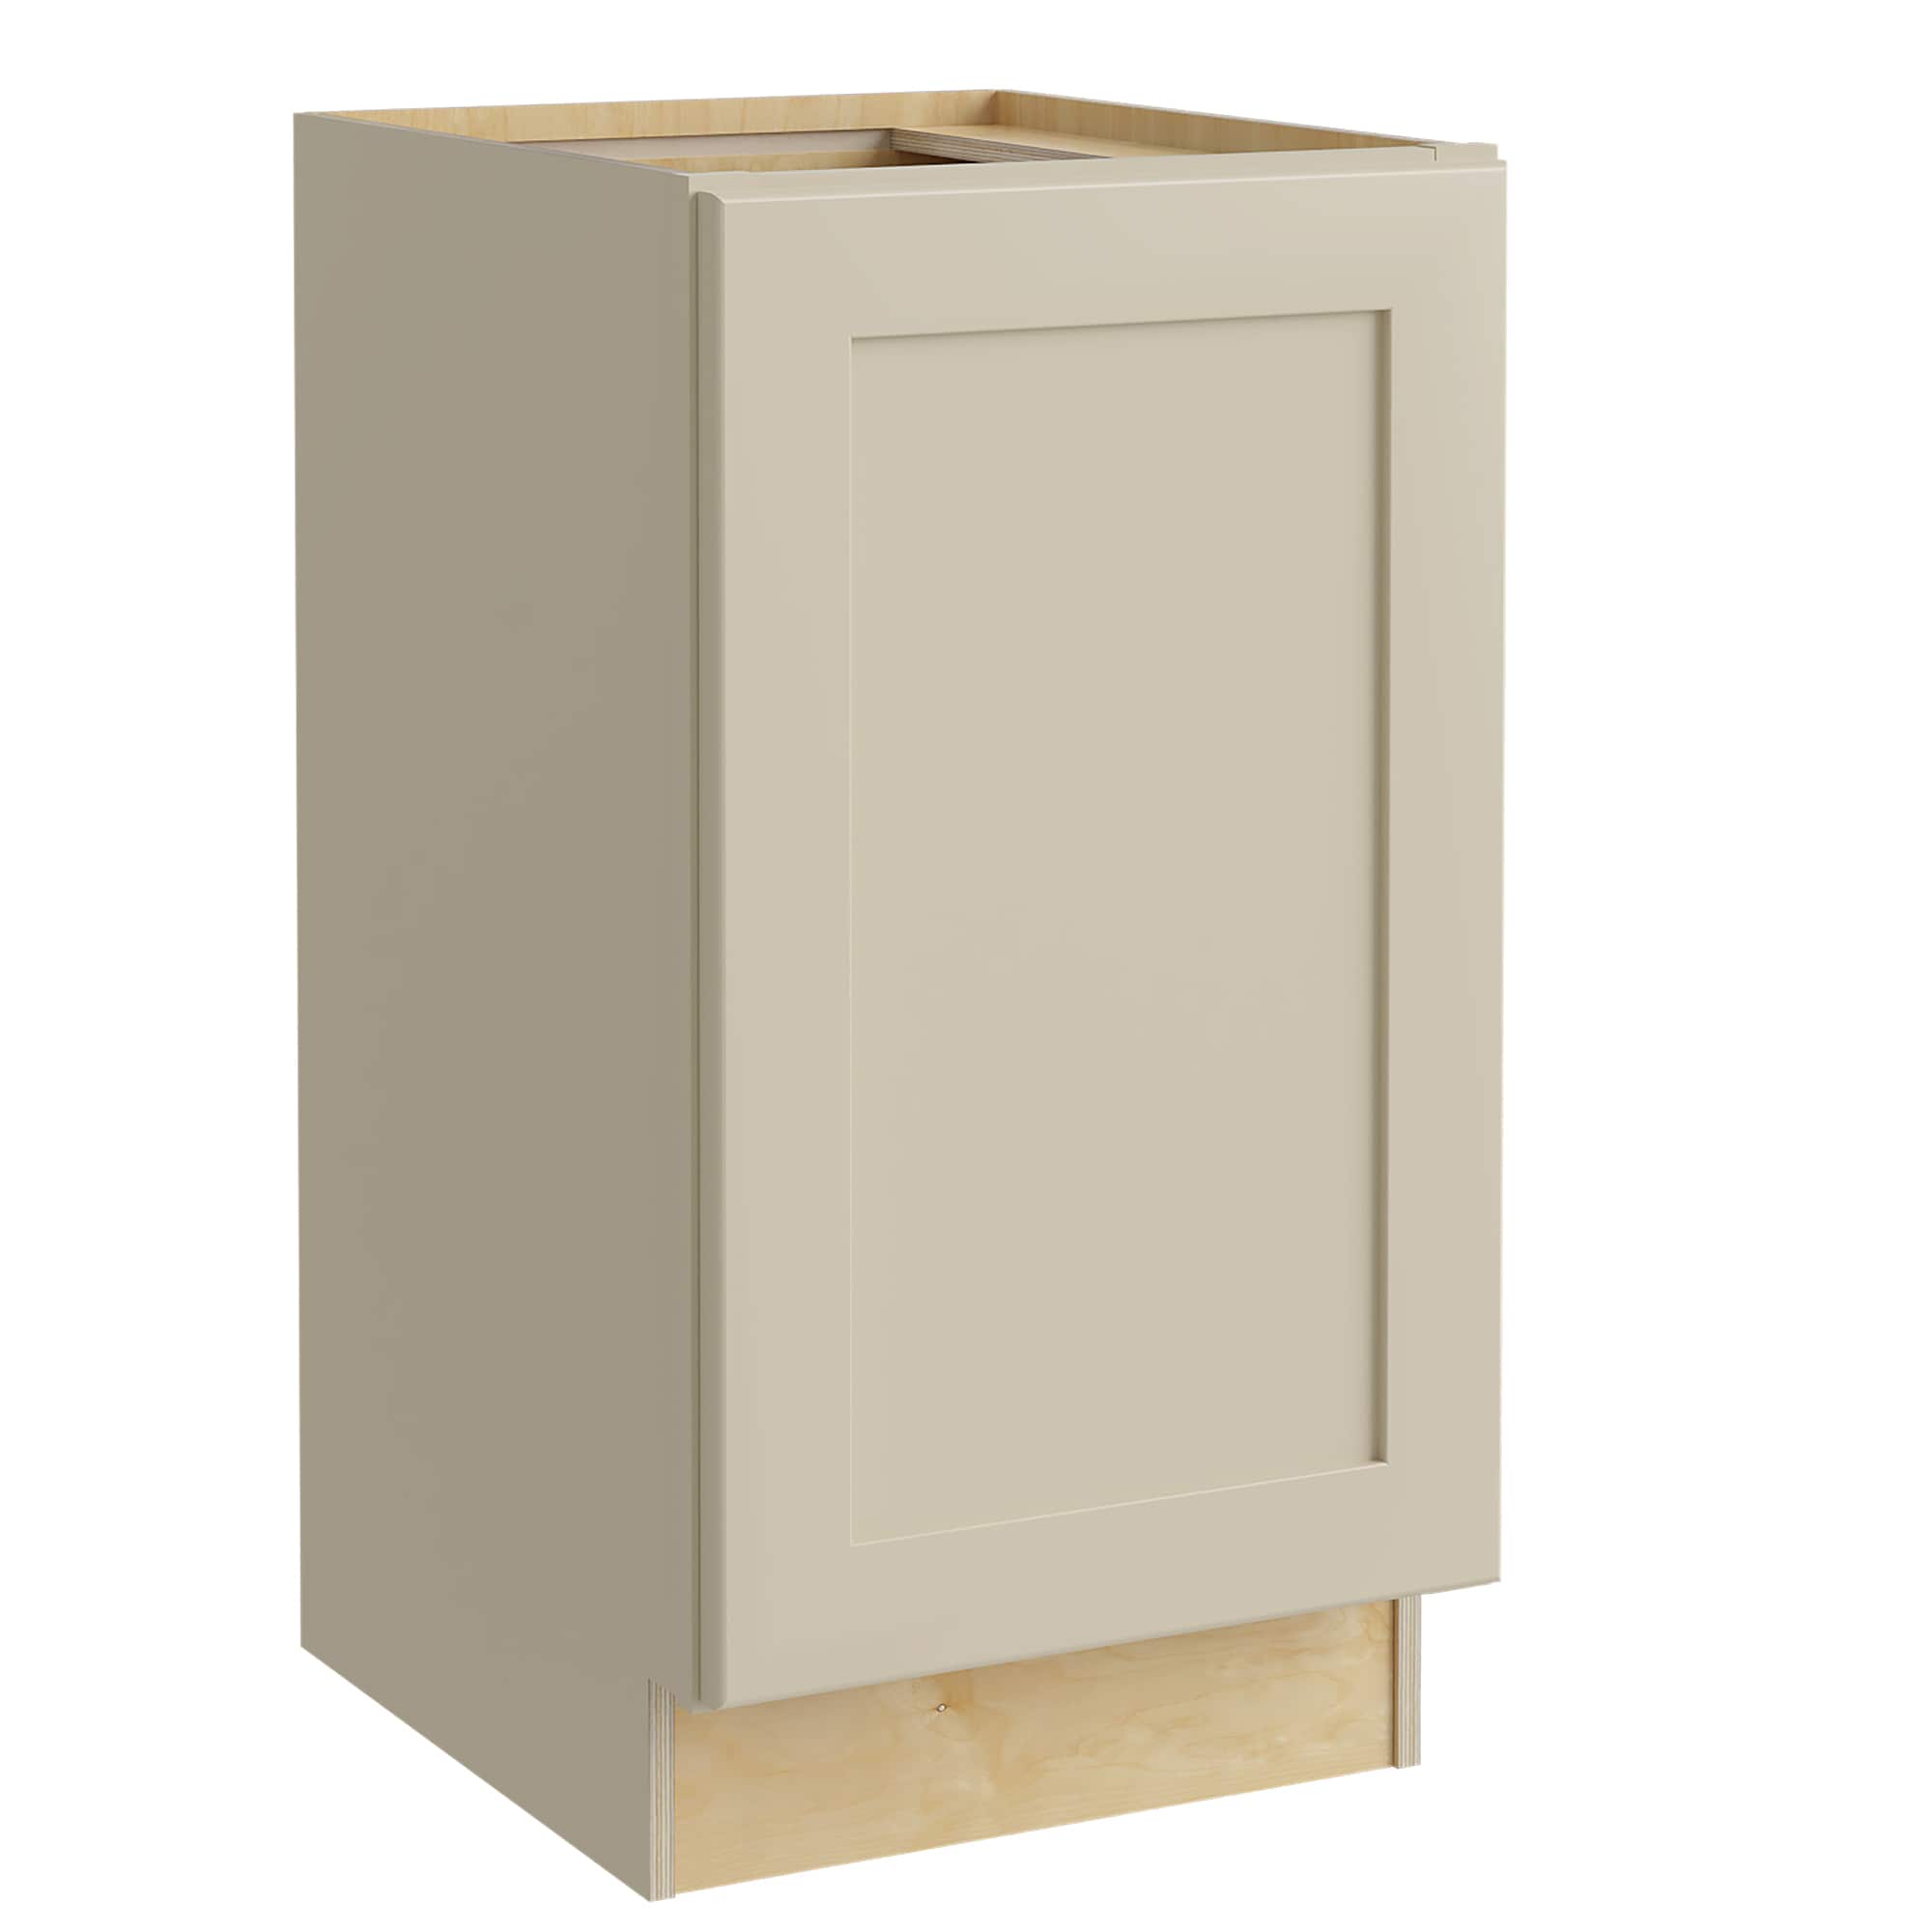 Luxxe Cabinetry 21-in W x 34.5-in H x 24-in D Norfolk Blended Cream Painted Door Base Fully Assembled Semi-custom Cabinet in Off-White | B21FHL-NBC